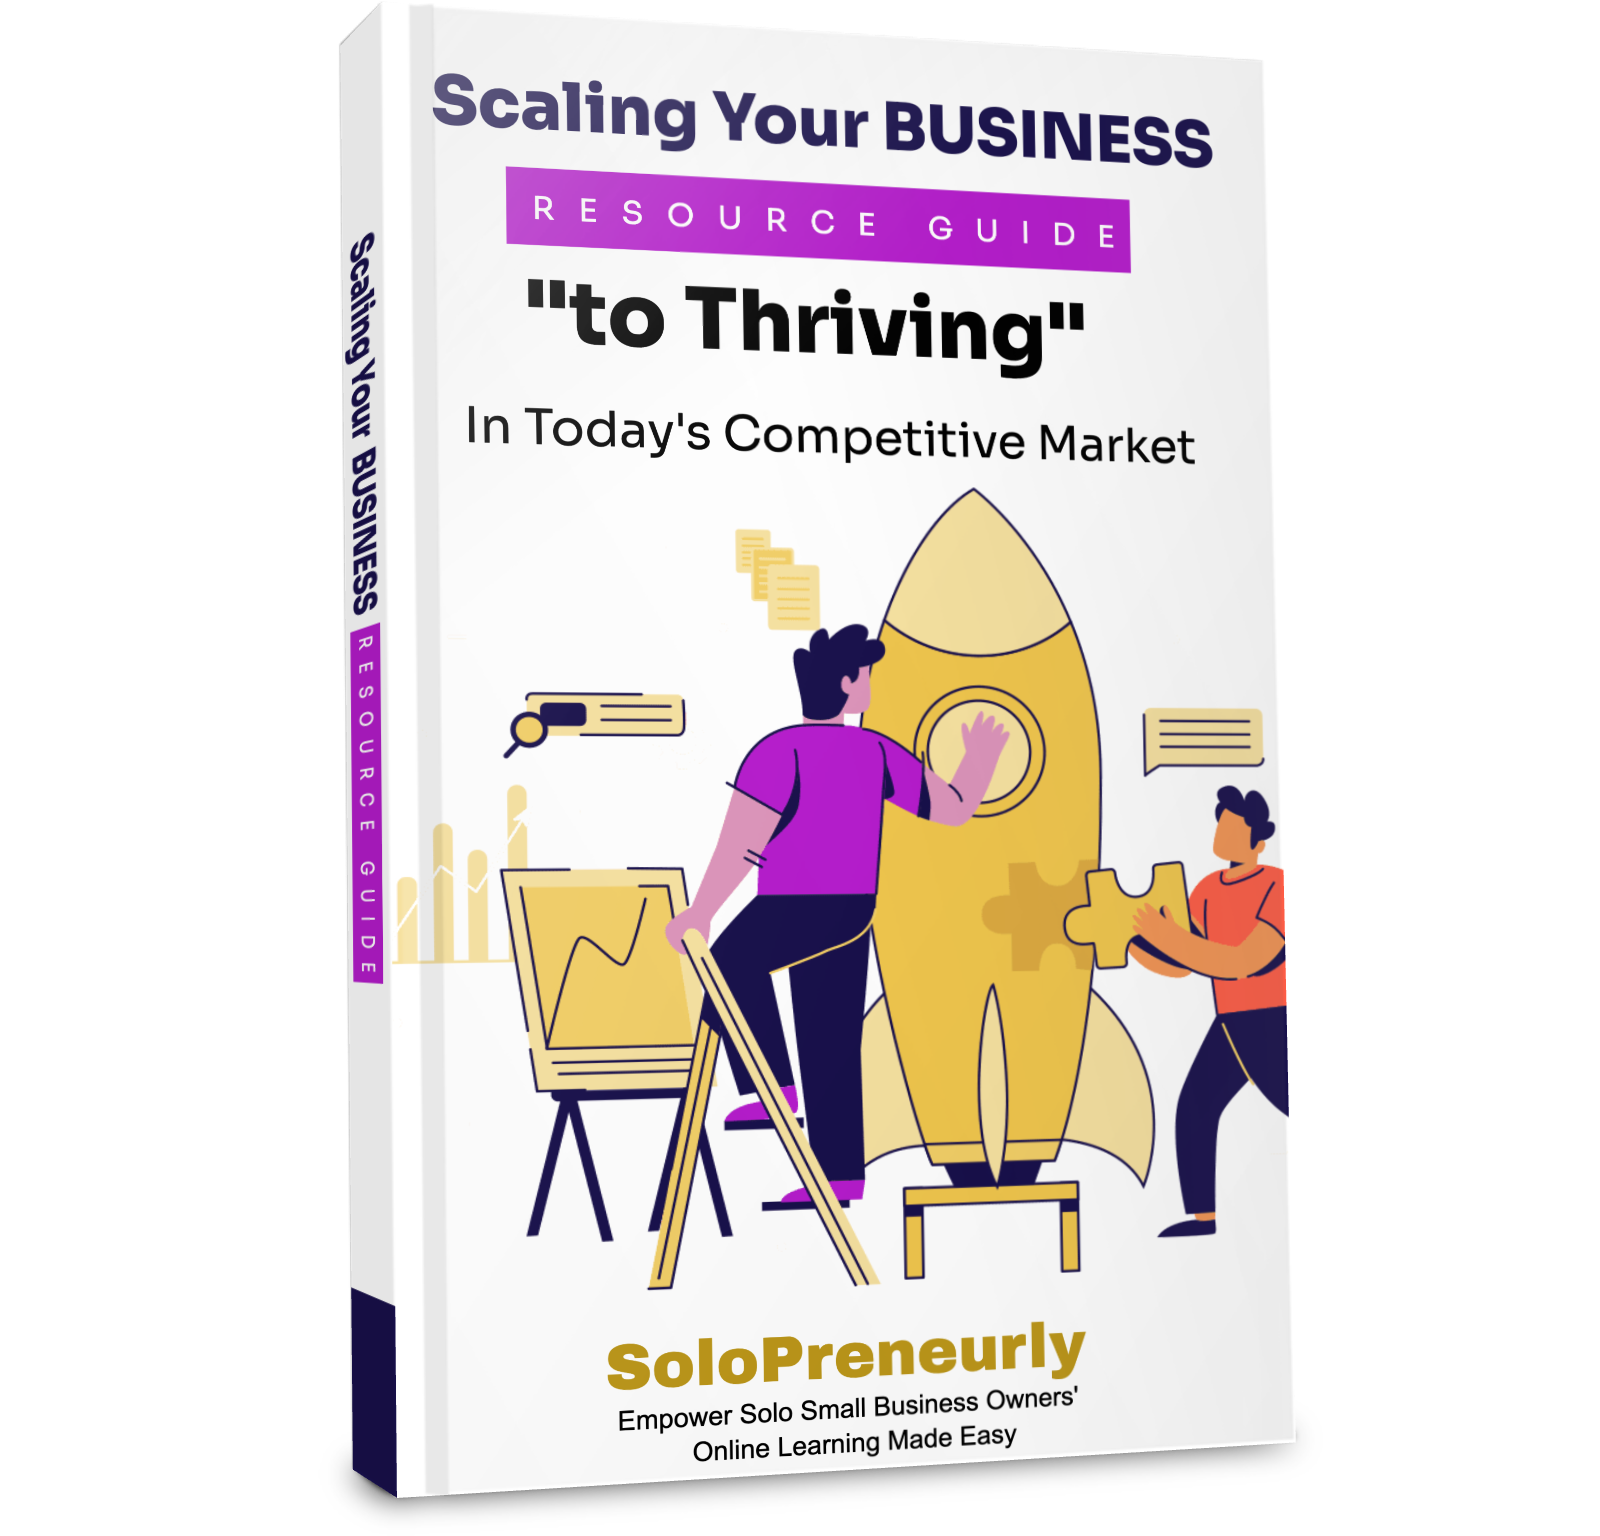 Scaling Your Business: Resource Guide to Thriving in Today's Competitive Market